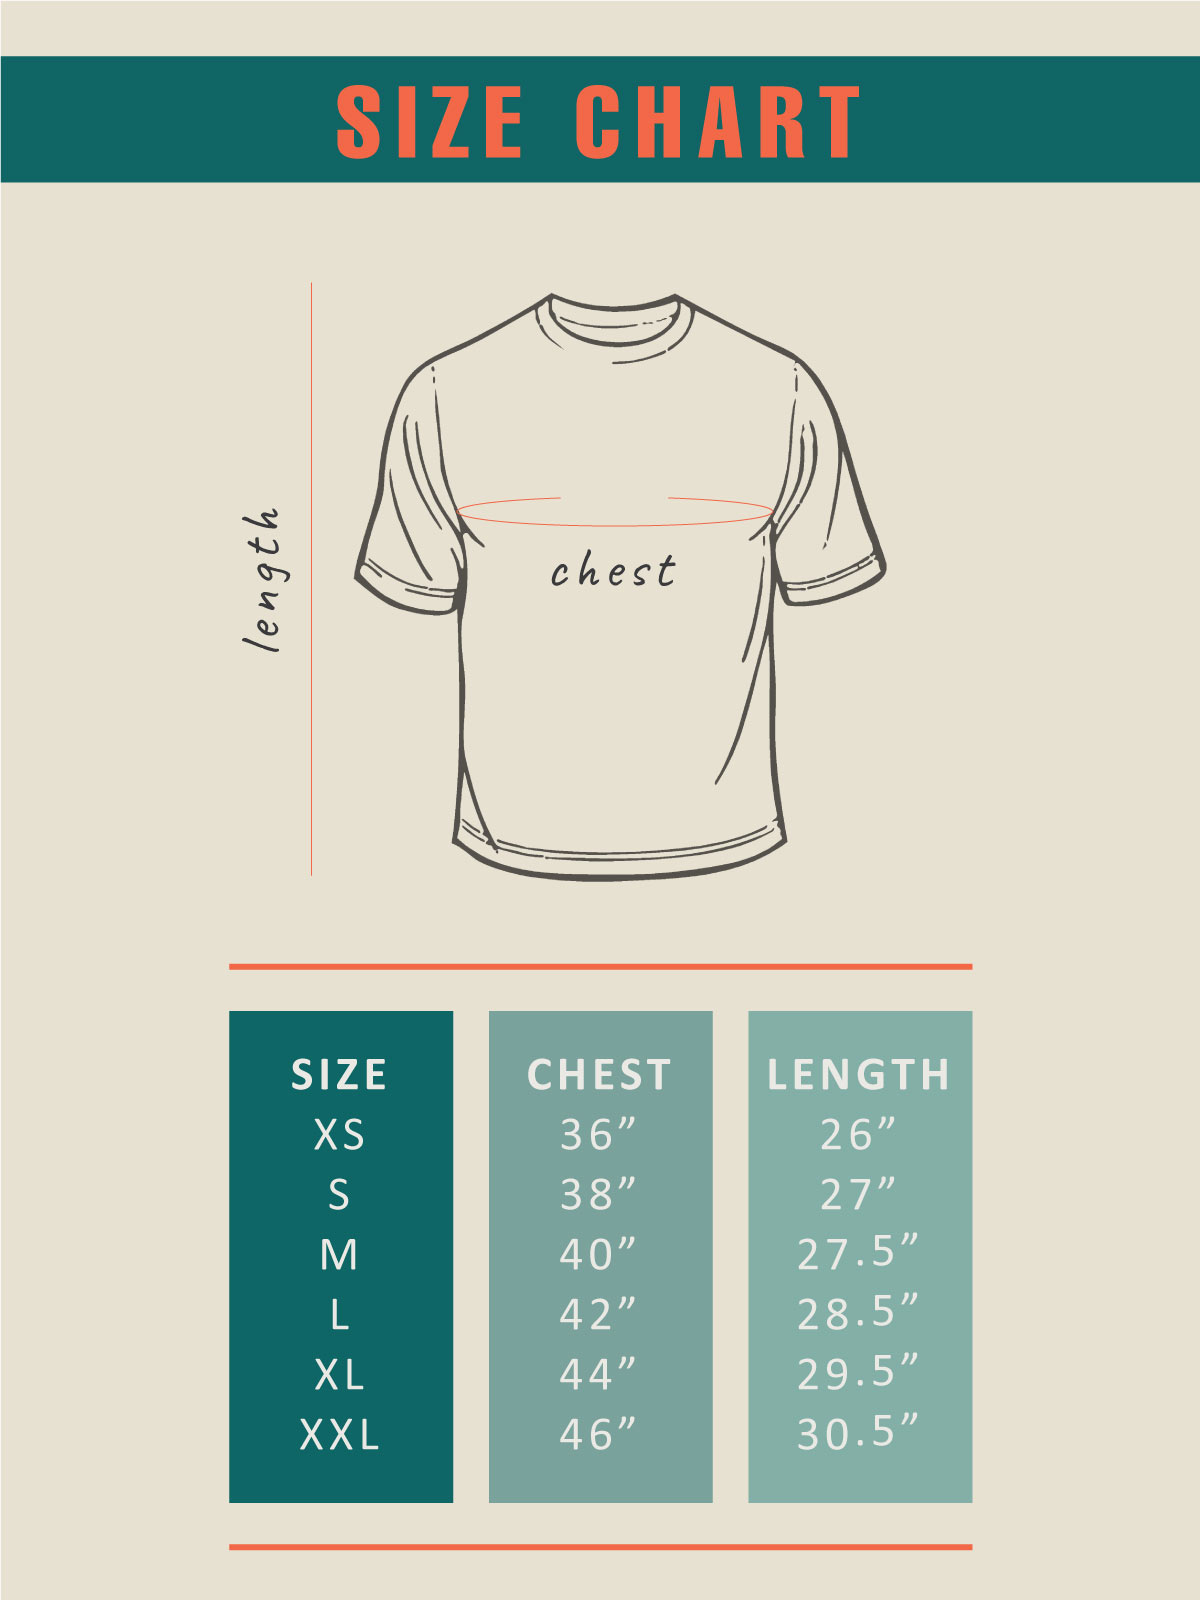 Size chart for unisex printed Tshirts by shopghumakkad